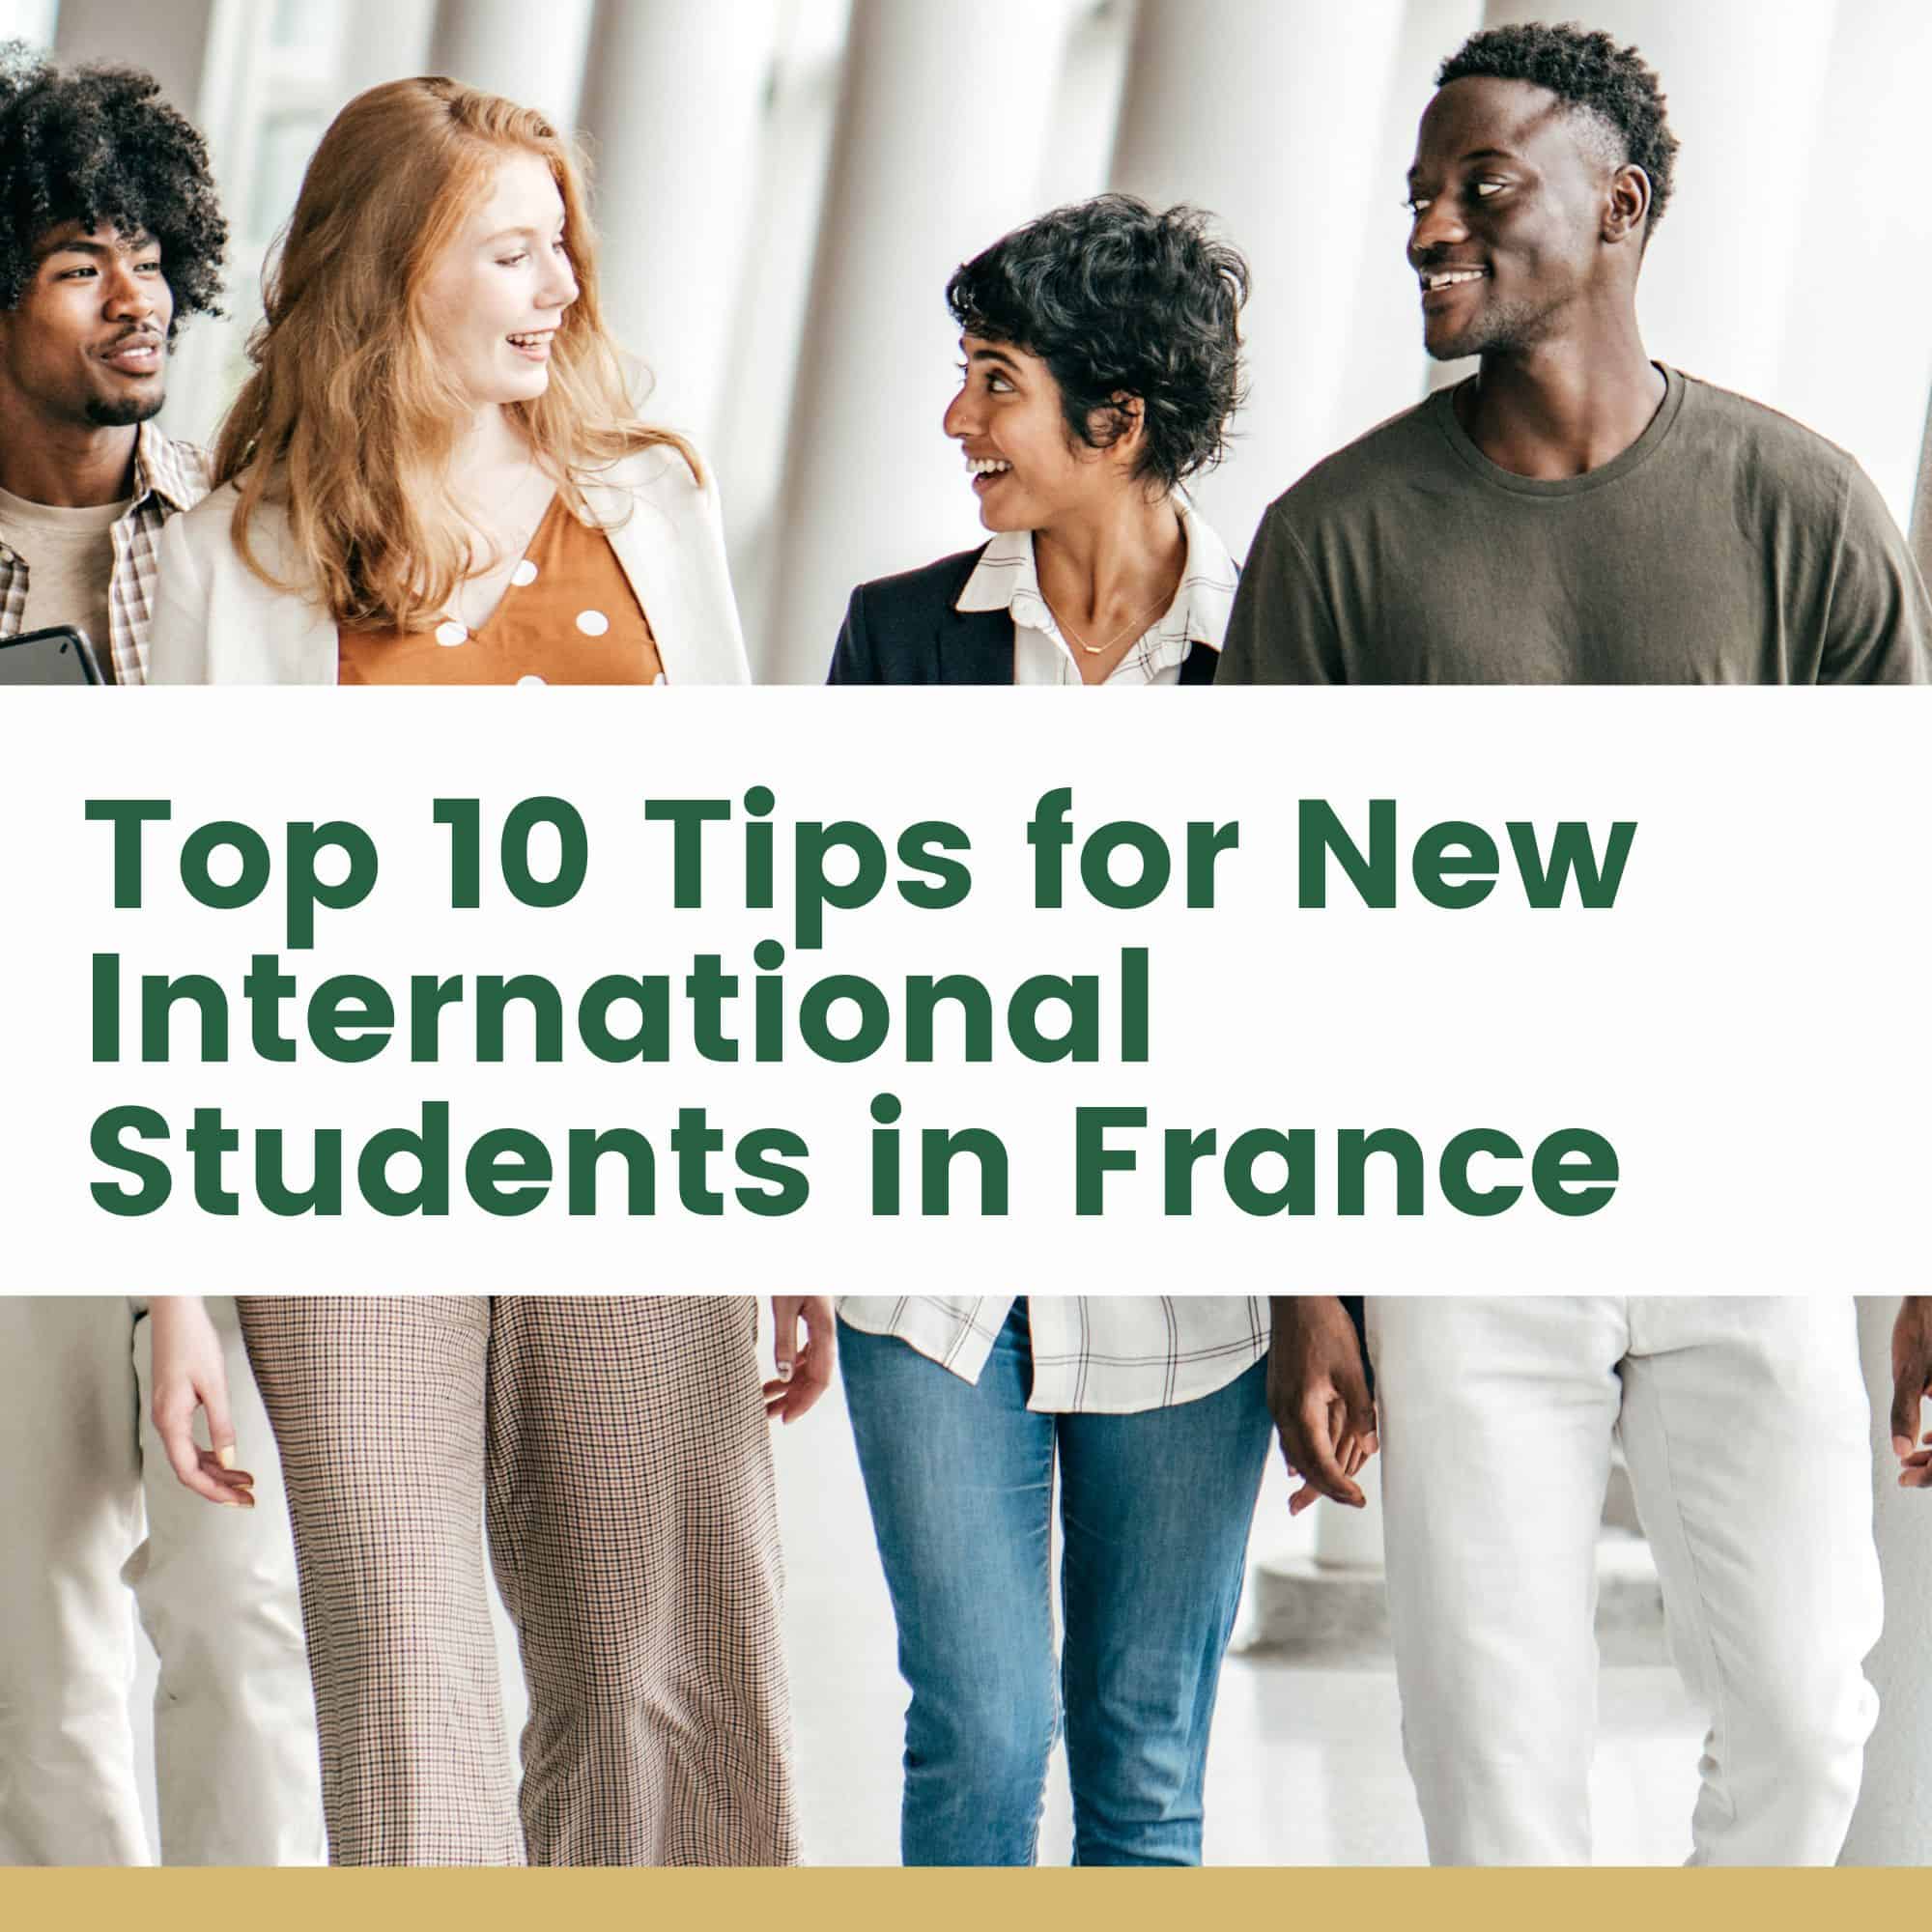 Top 10 Tips for New International Students in France